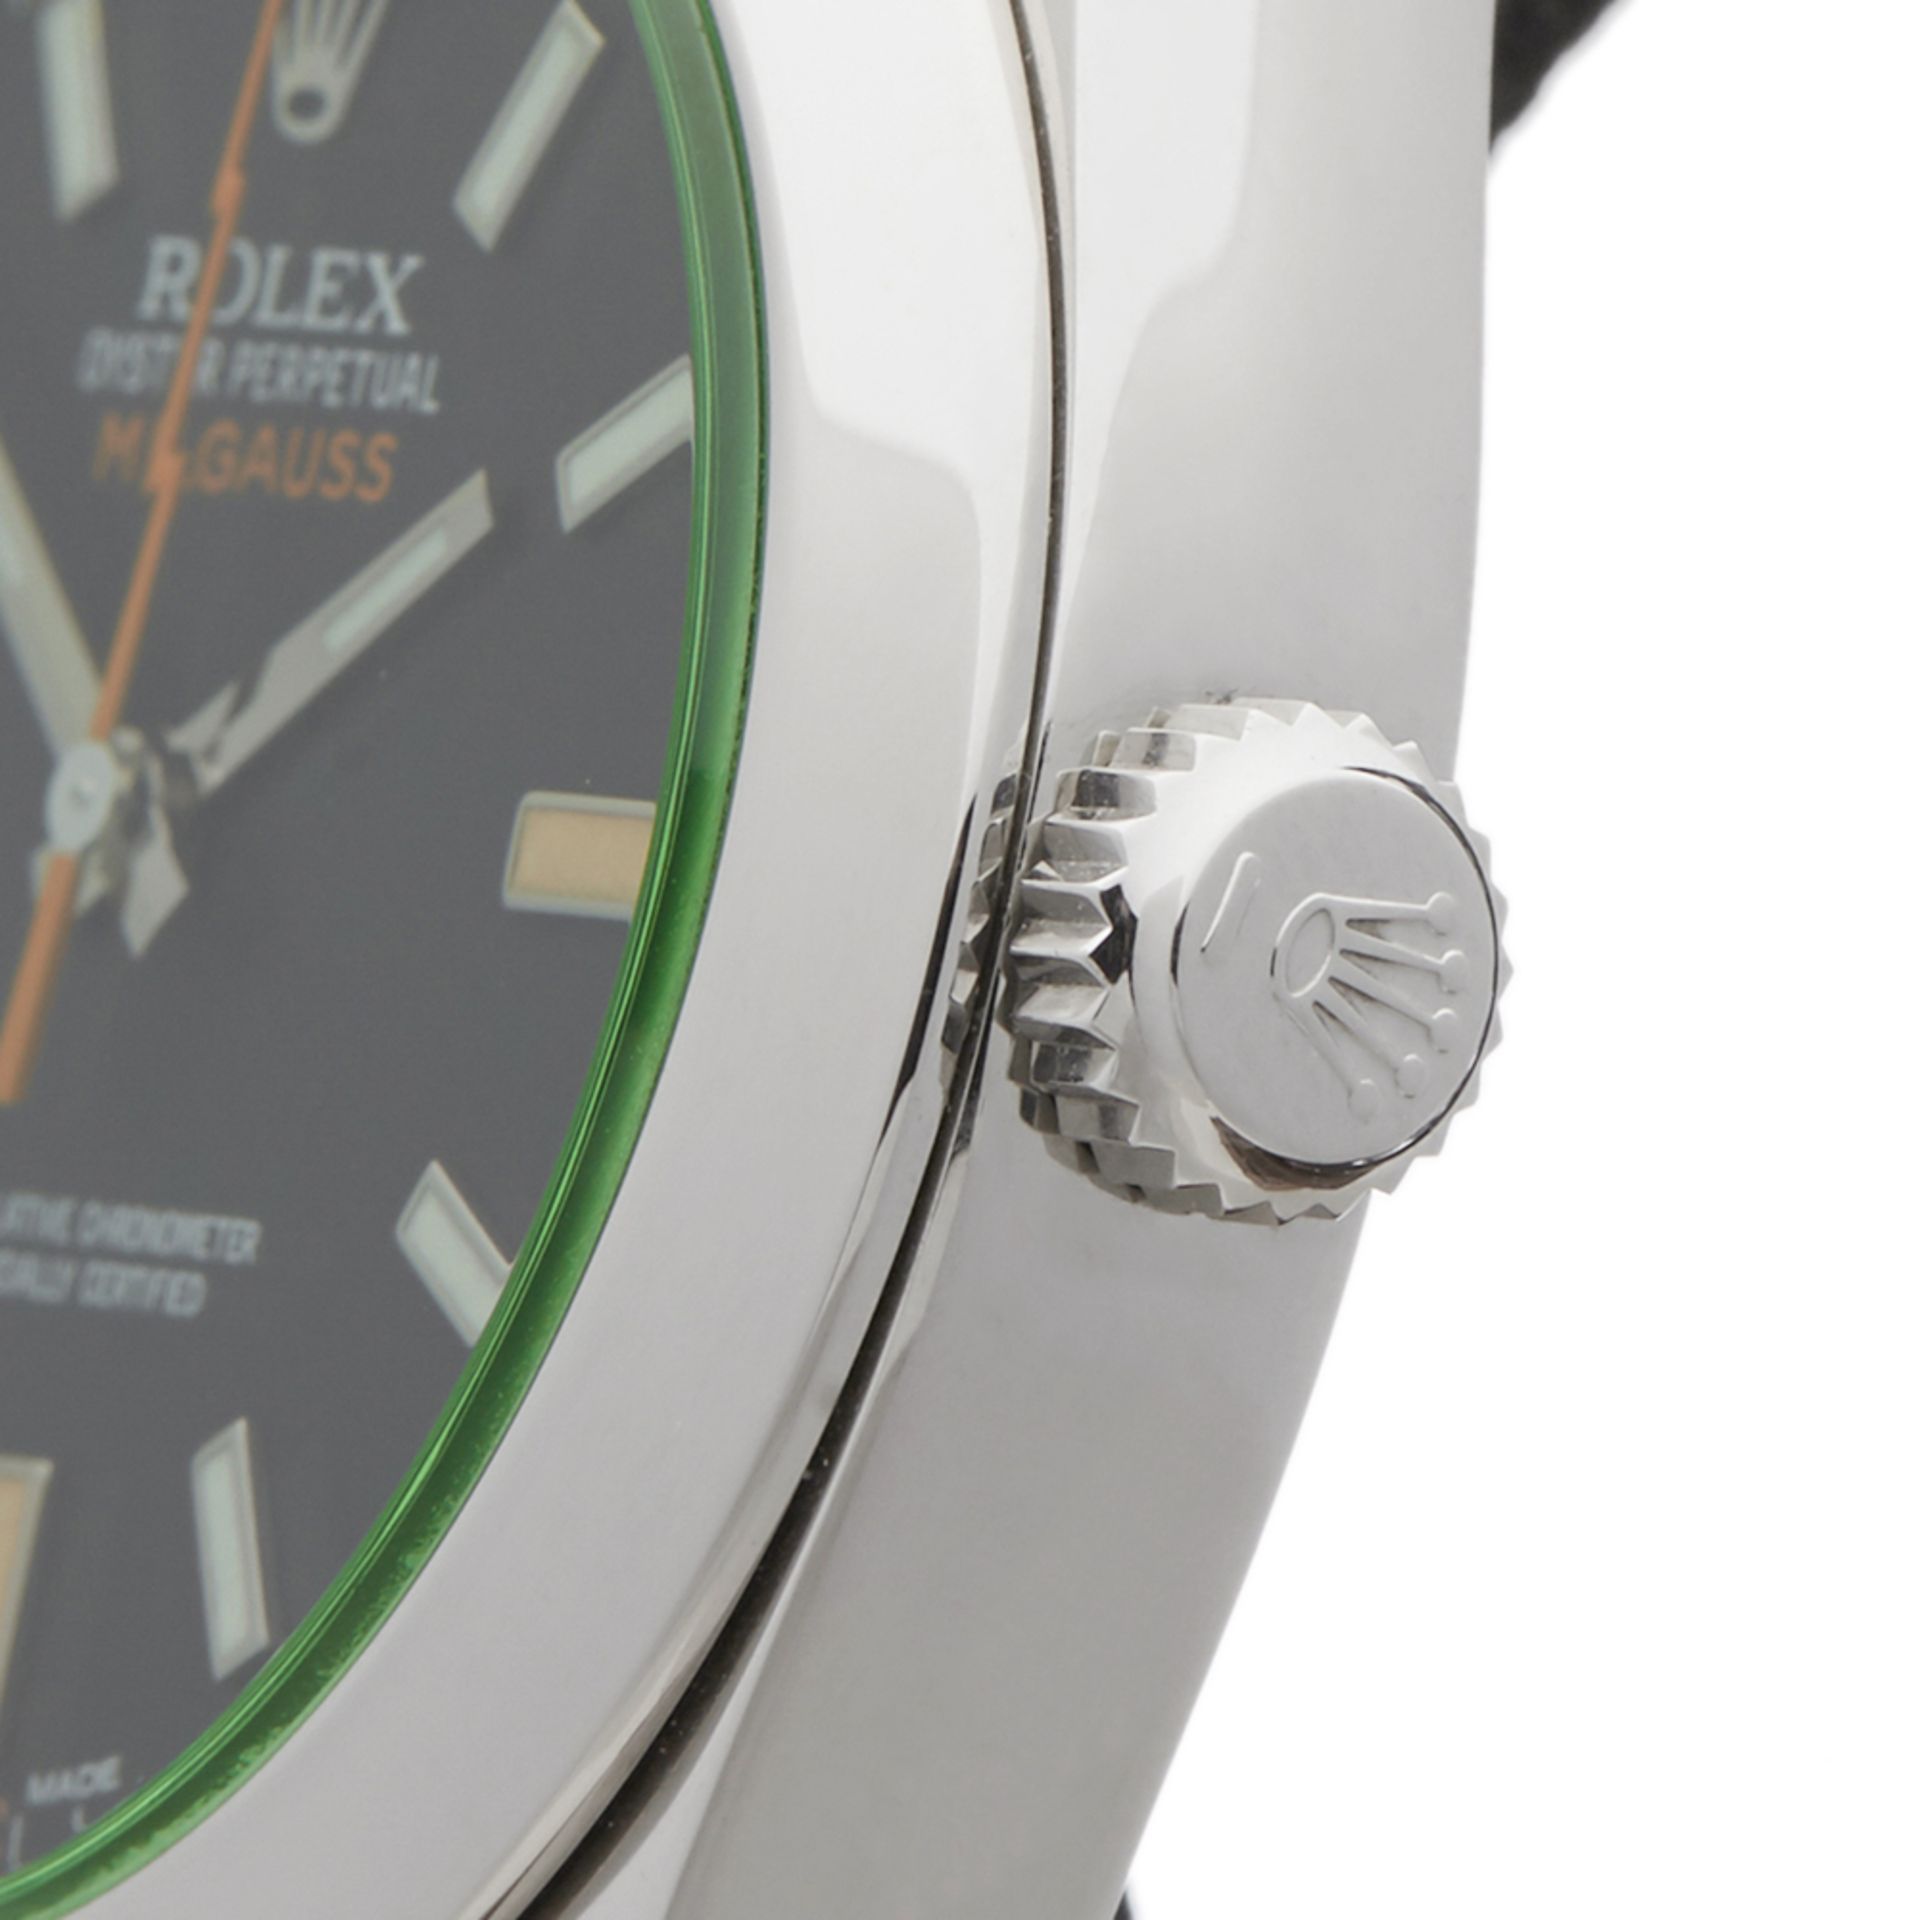 Rolex, Milgauss Green Glass 40mm Stainless Steel 116400GV - Image 4 of 9